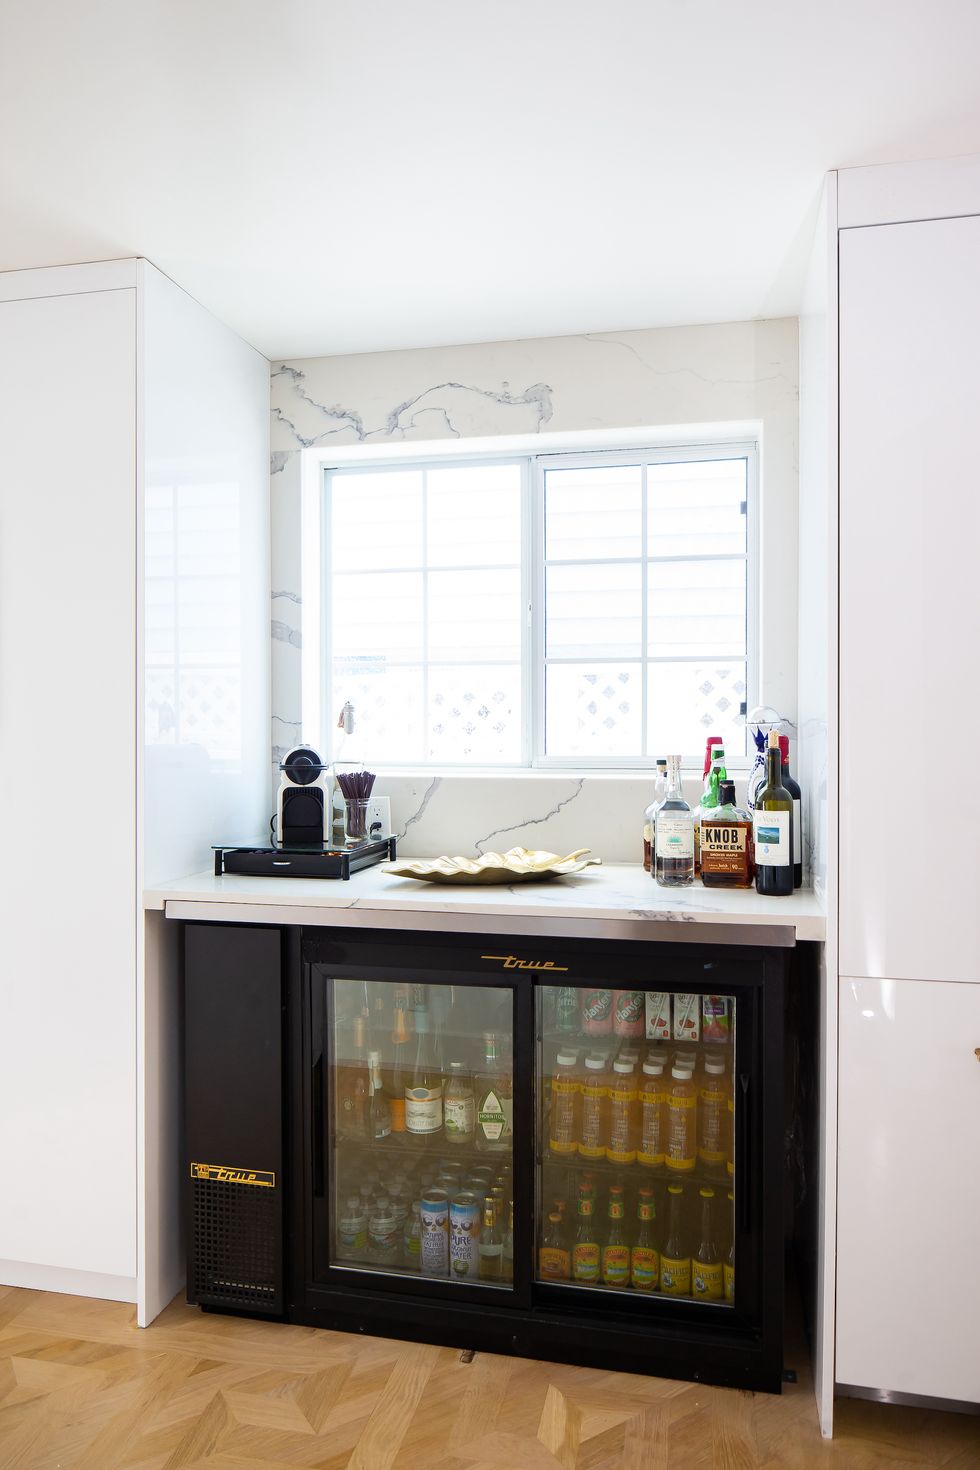 DIY Corner Coffee Bar Build: Wine Storage, Floating Shelves, Cabinets and  more! - Make it with Kate